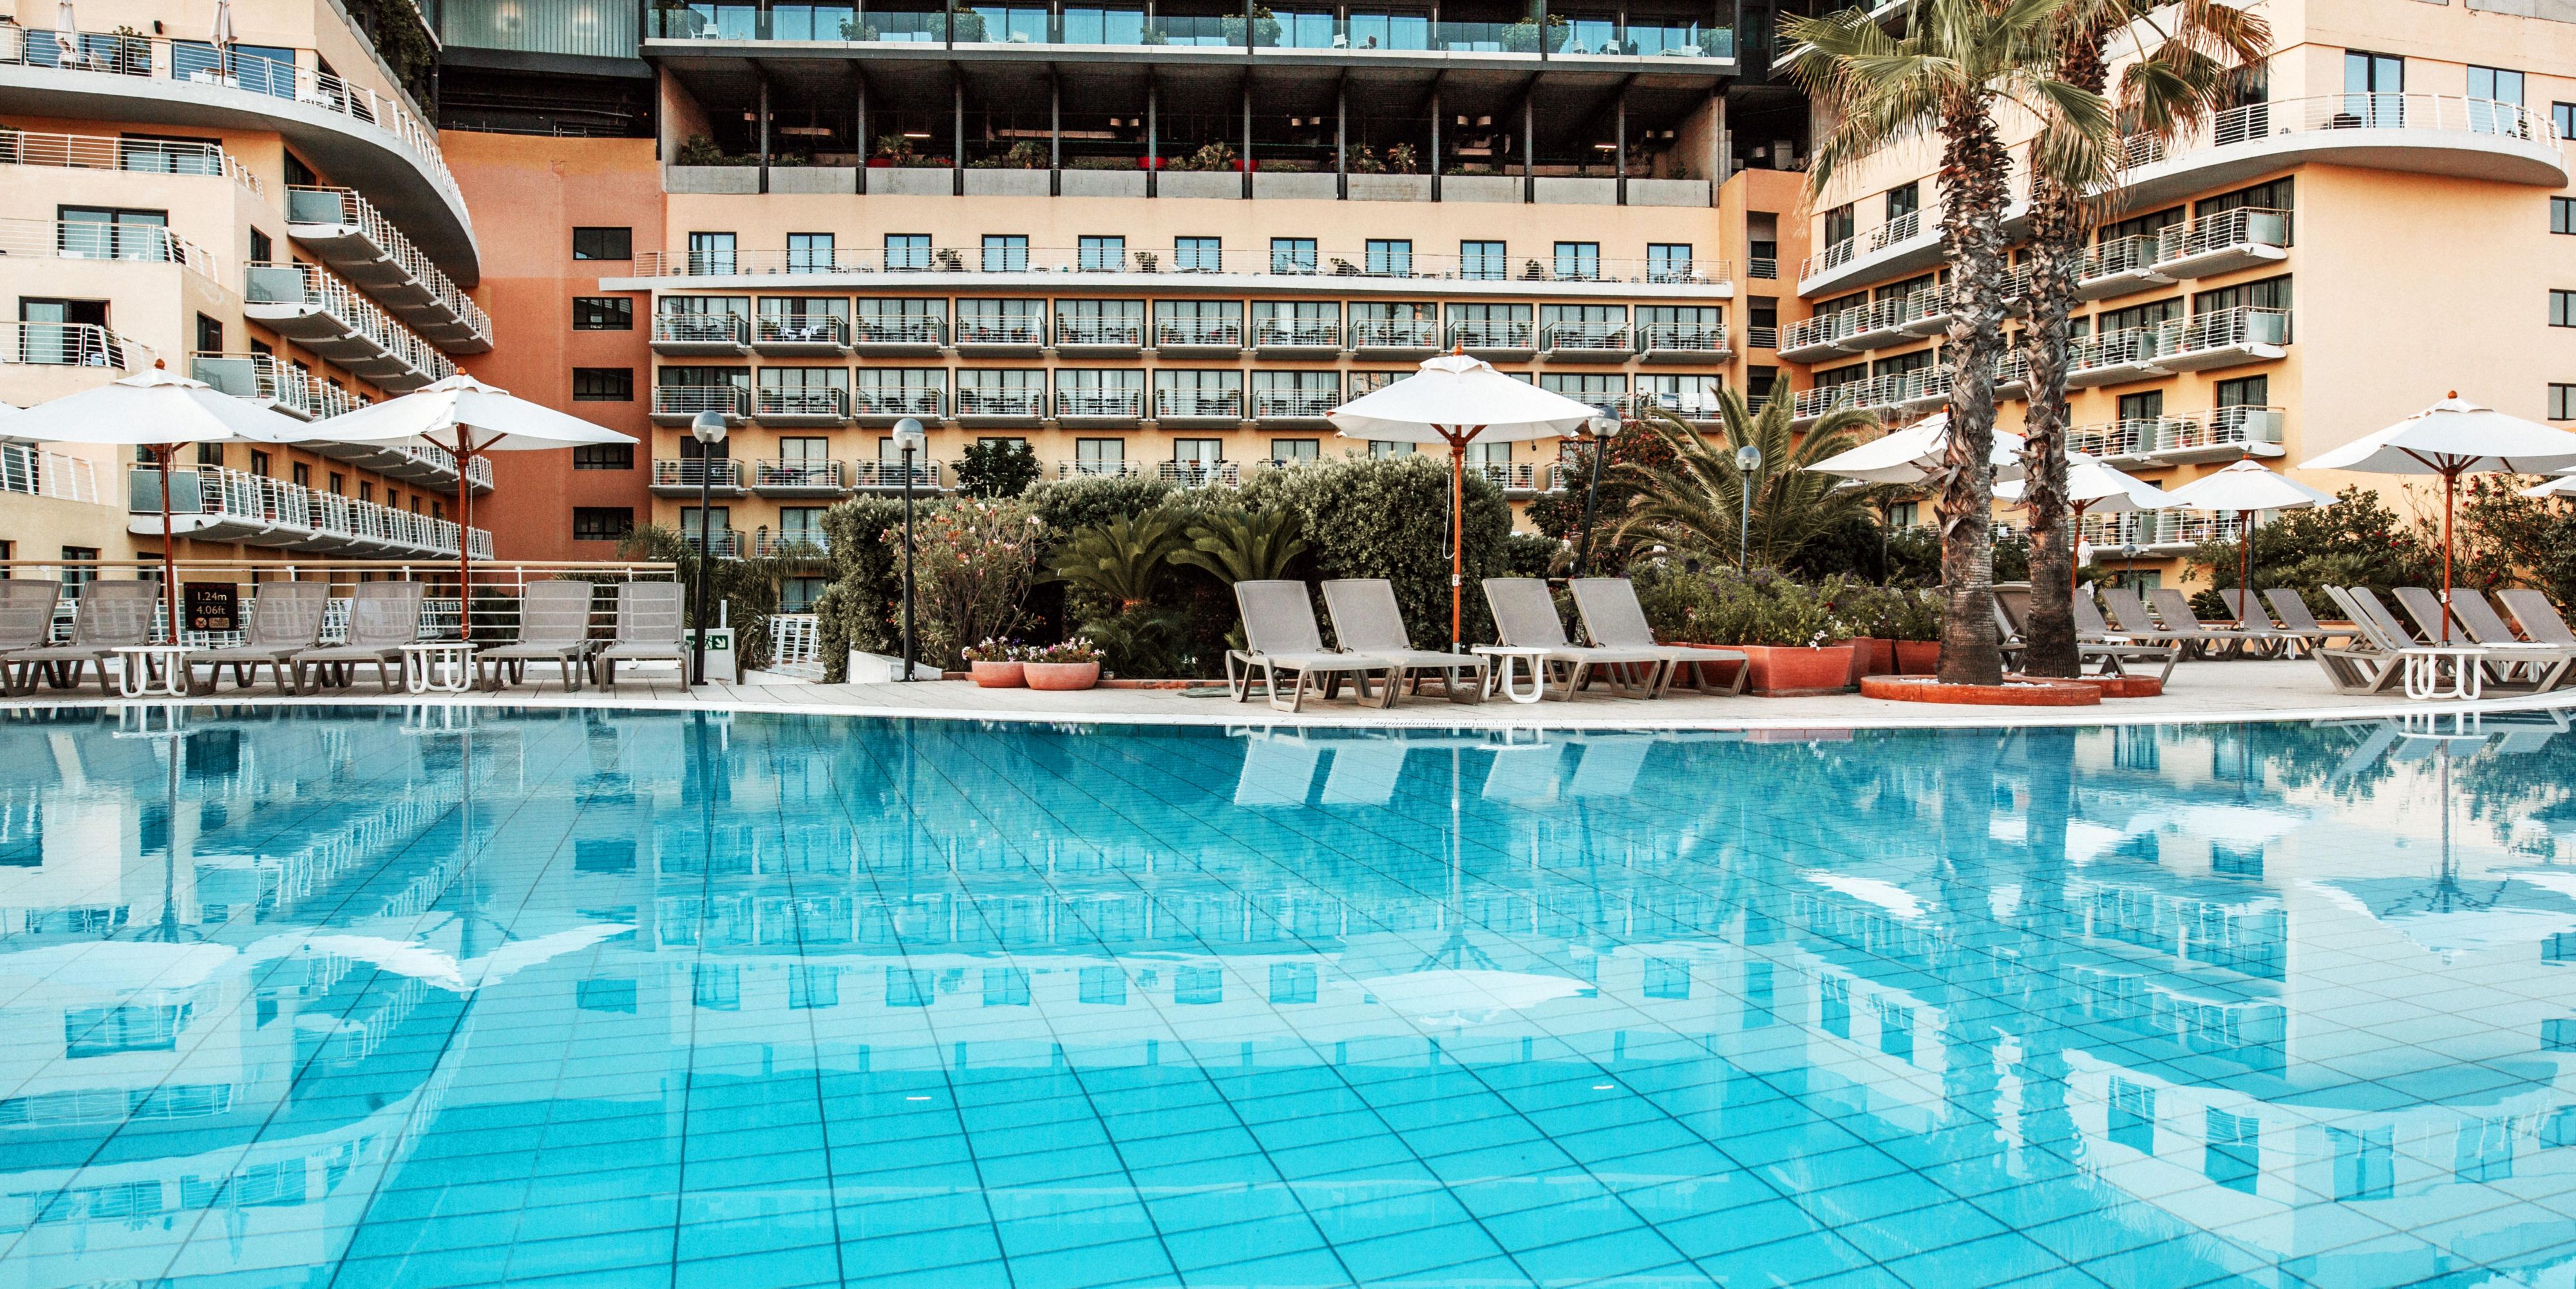 With every stay, get access to the outdoor pool and heated indoor pool for maximum comfort and relaxation. Guests can make use of the spa and Malta's largest gym, Cynergi.
Opening and closing time of the Indoor Pool - 07.00 am  - 23.00 pm,
Opening and closing time of the Outdoor Pool: 09.00 am - 19.00 pm
Note: The outdoor pool is closed for winter.